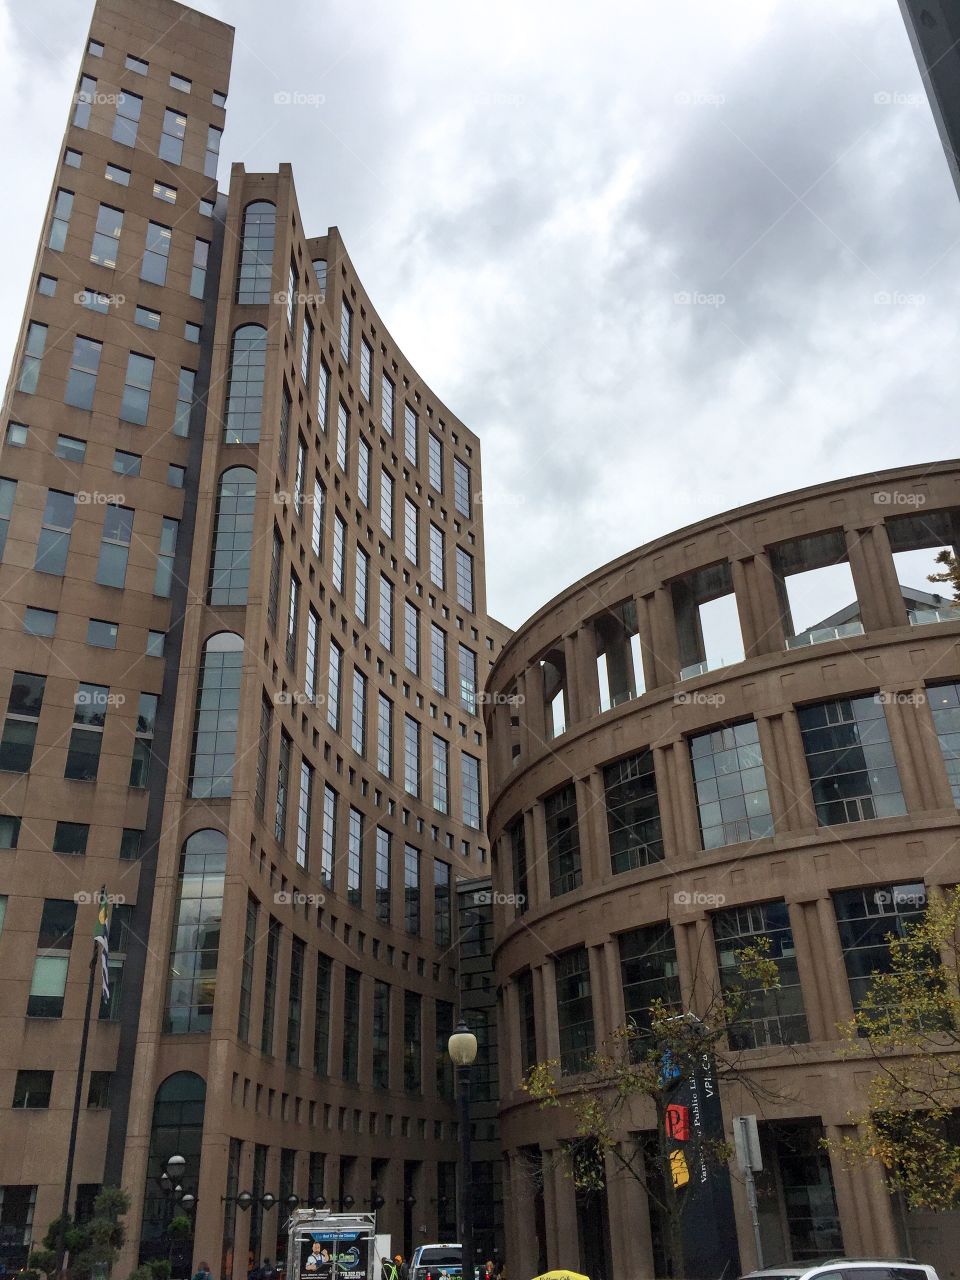 Interesting architecture of the Vancouver Public Library in Vancouver, British Columbia 